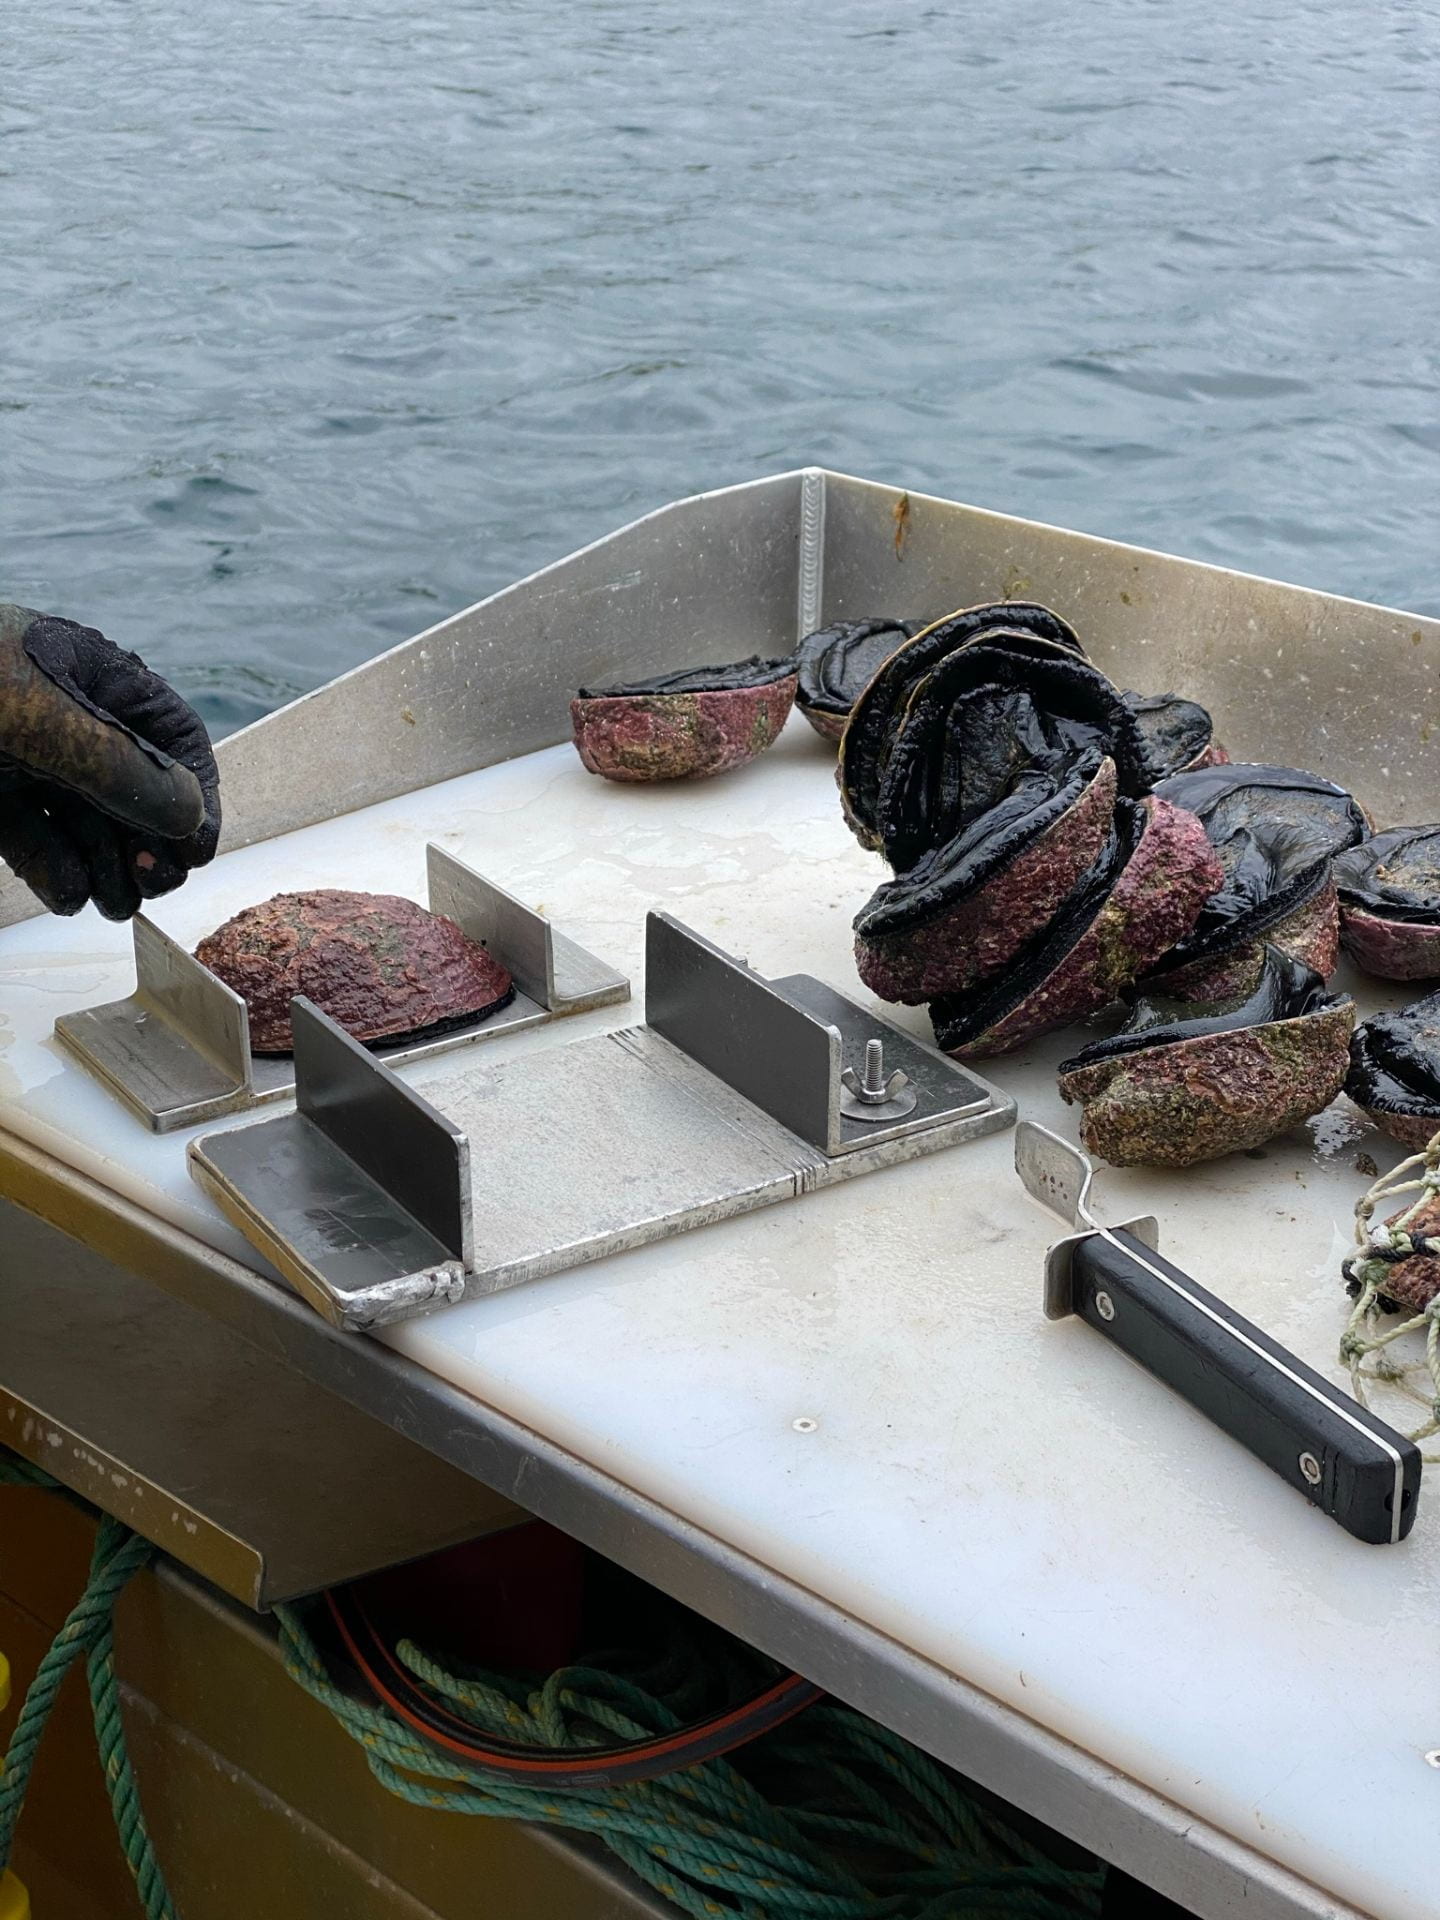 Pāua on a white bench on a boat, with one pāua inside a measuring device to check it is legal size